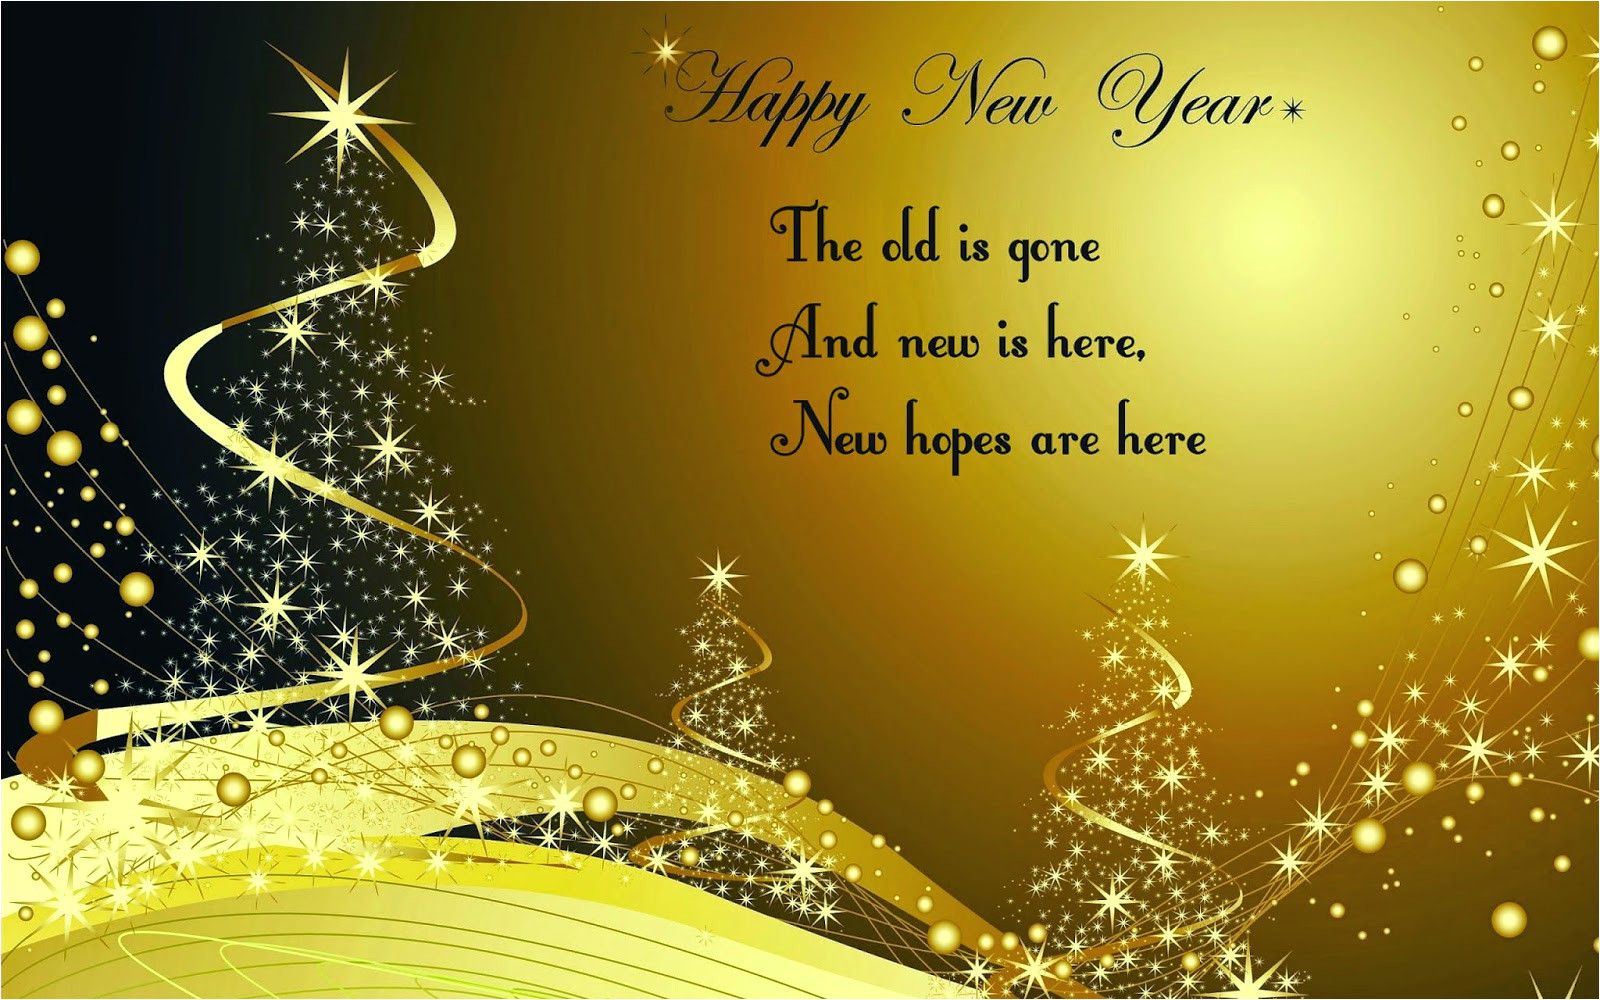 happy new year greetings quotes 2016 15 jpg